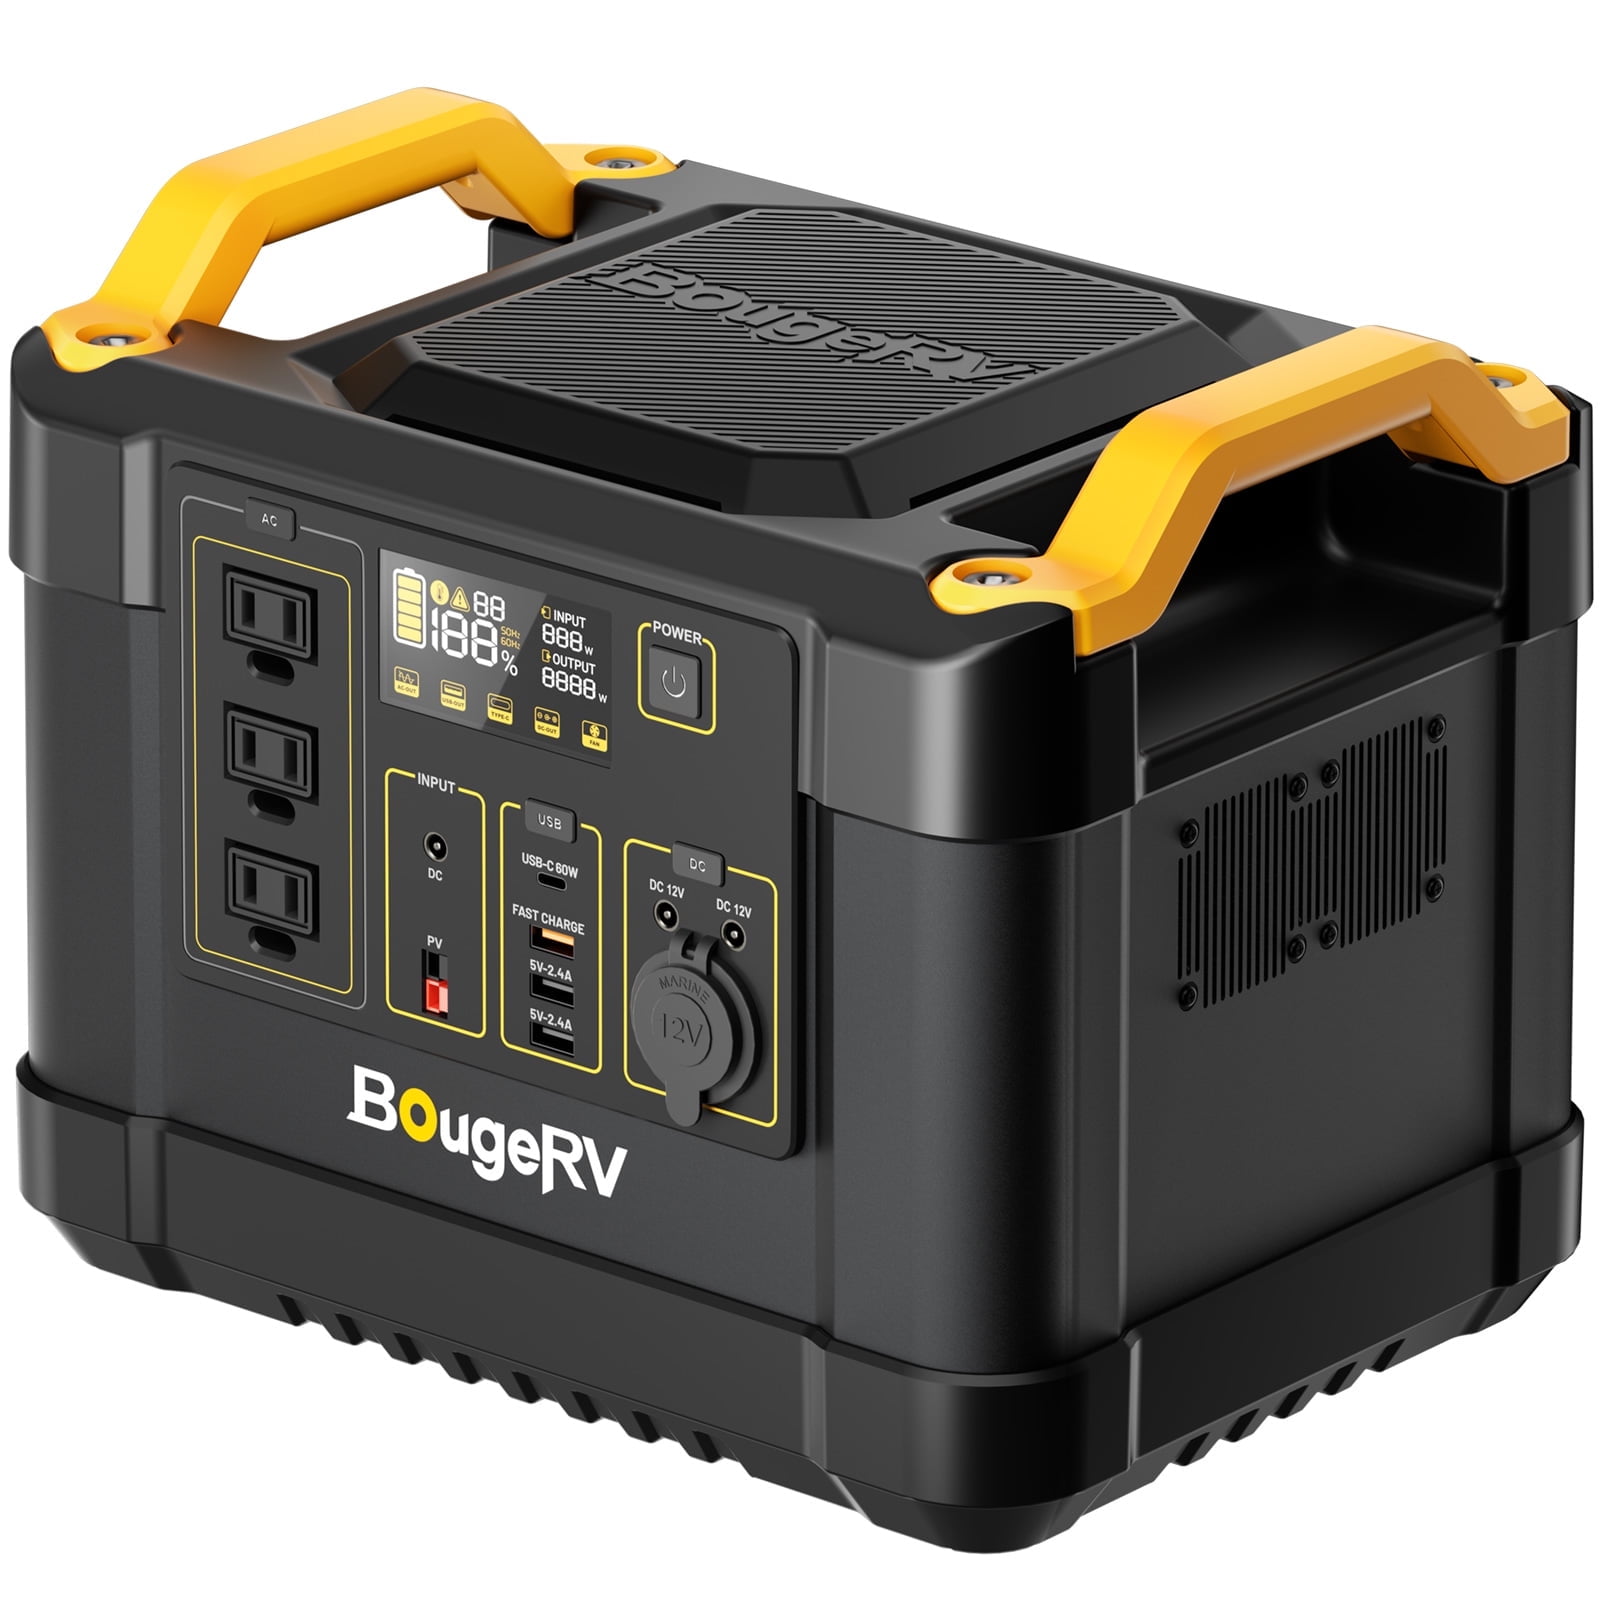 BougeRV Fort 1000 Review: Is This Your New Go-To Solar Power Station?